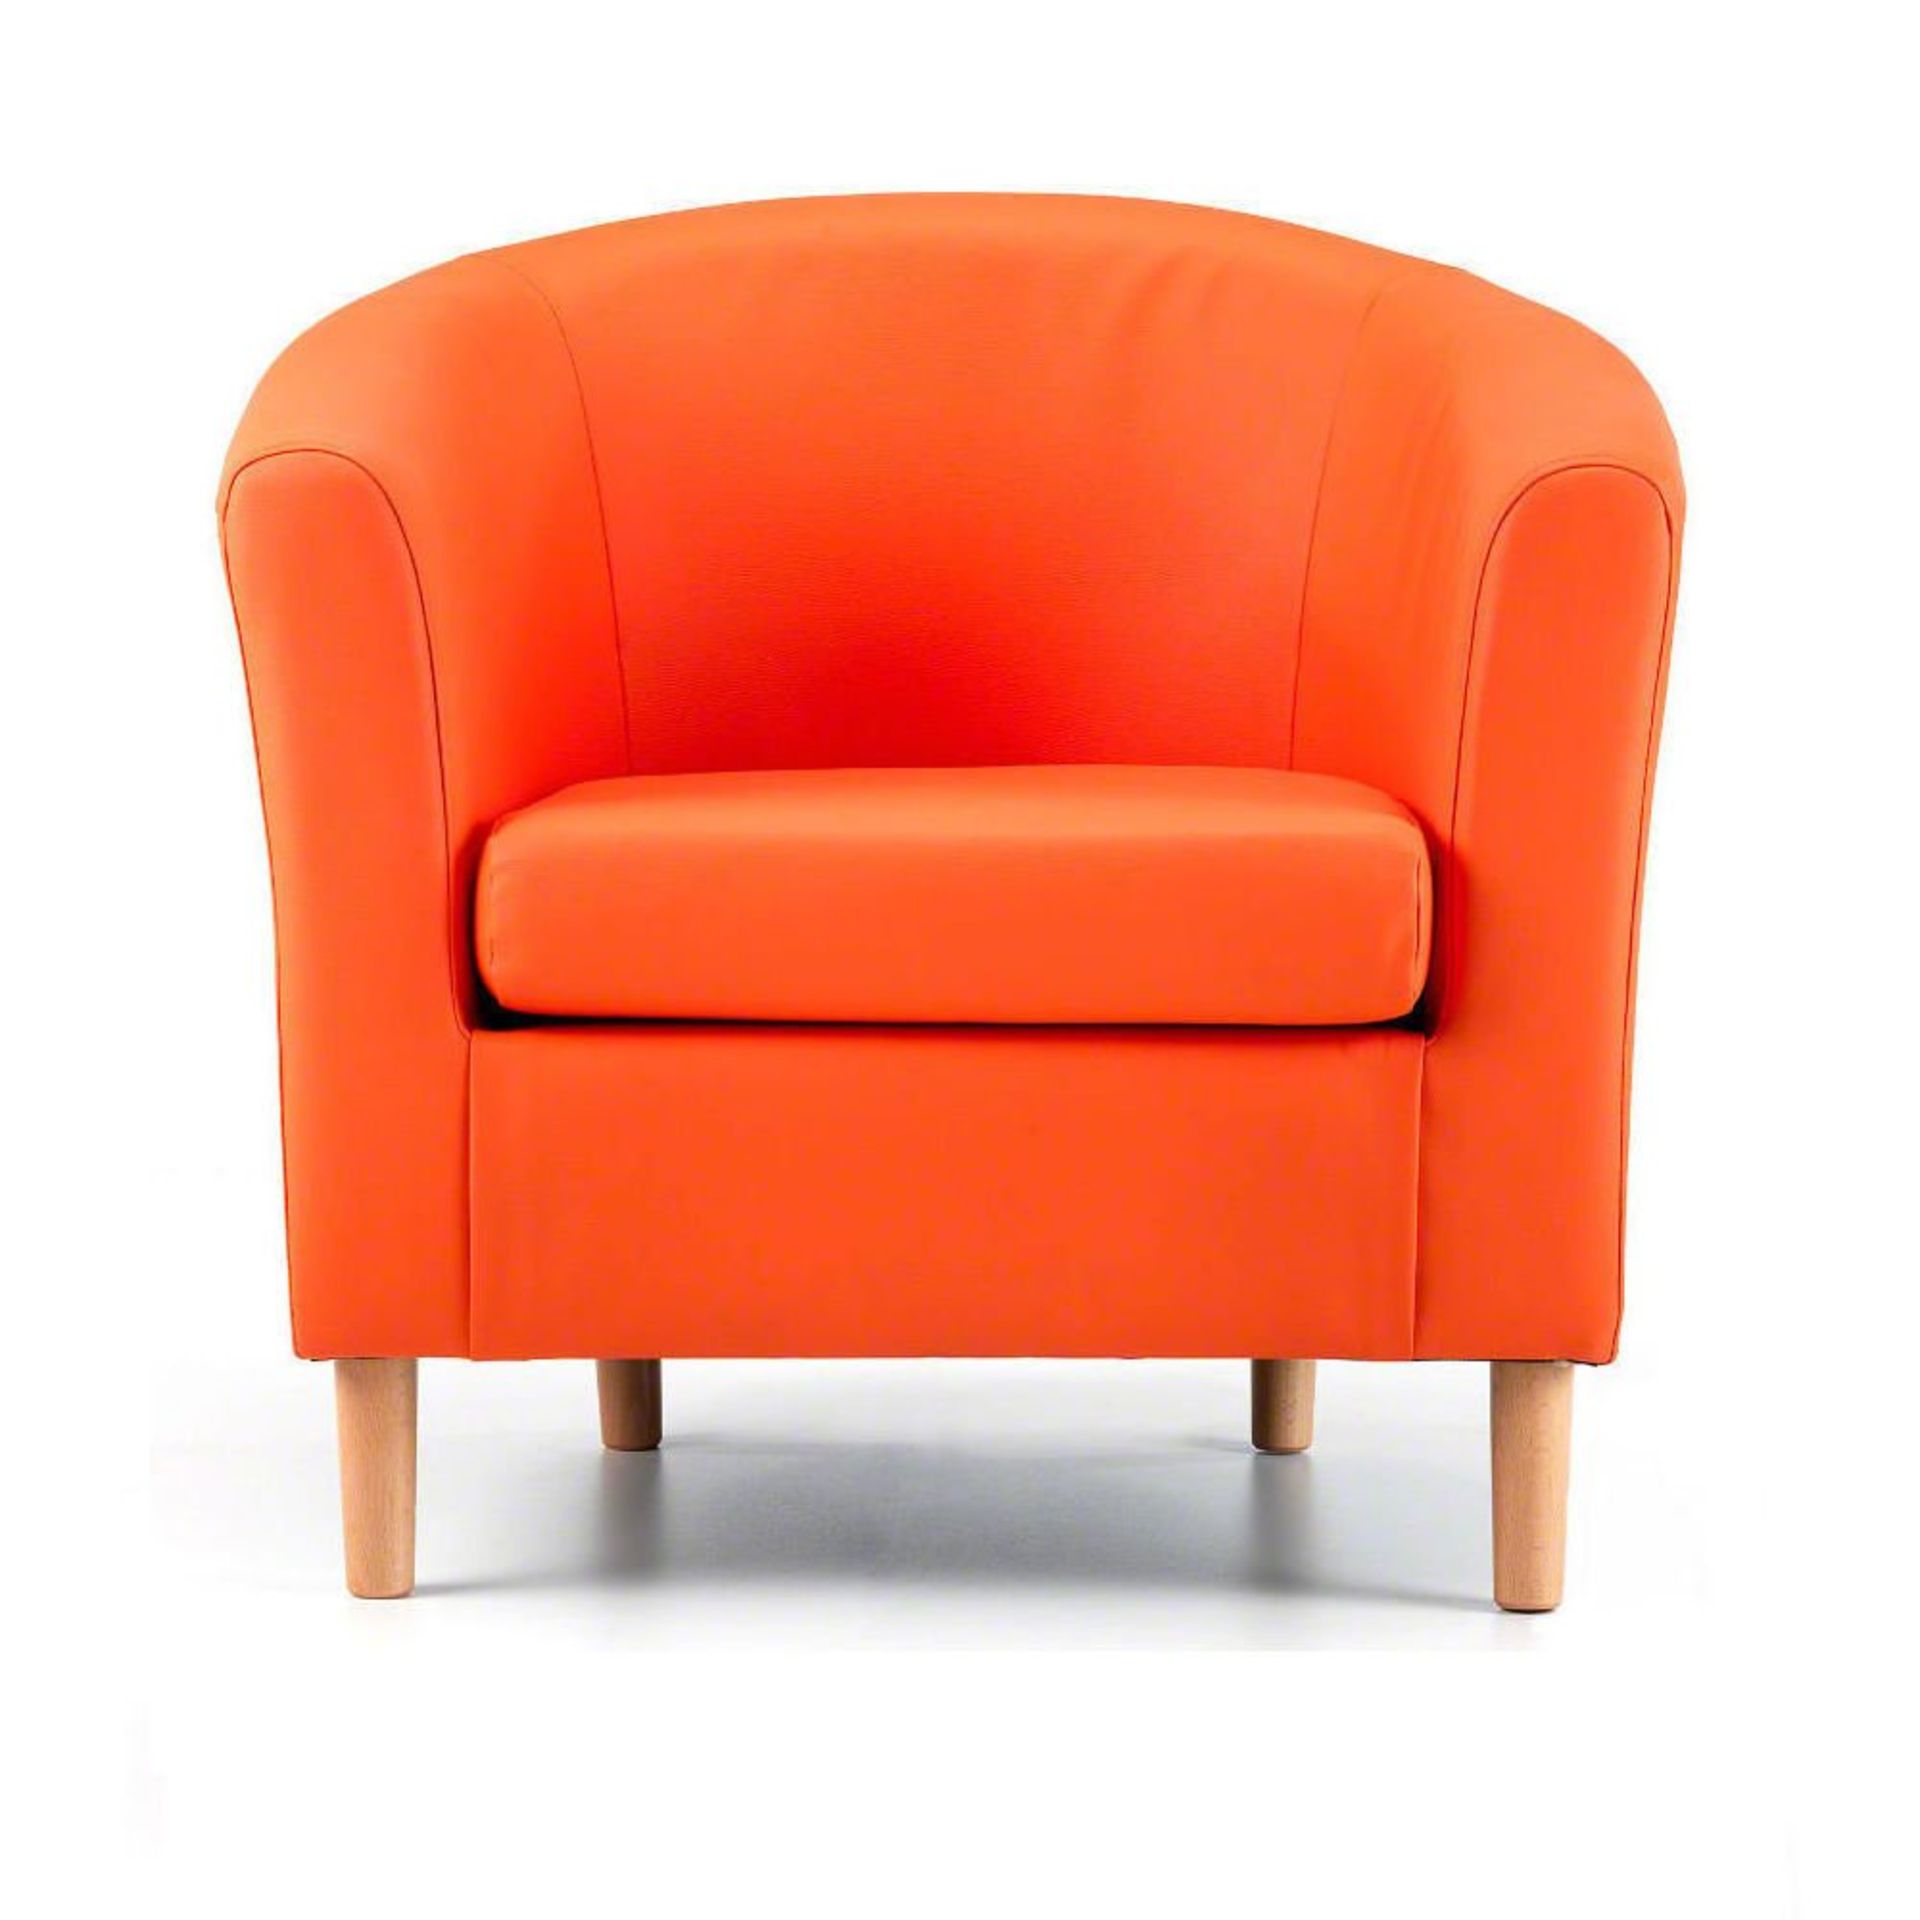 Orange faux leather tub chair with dark wooden legs